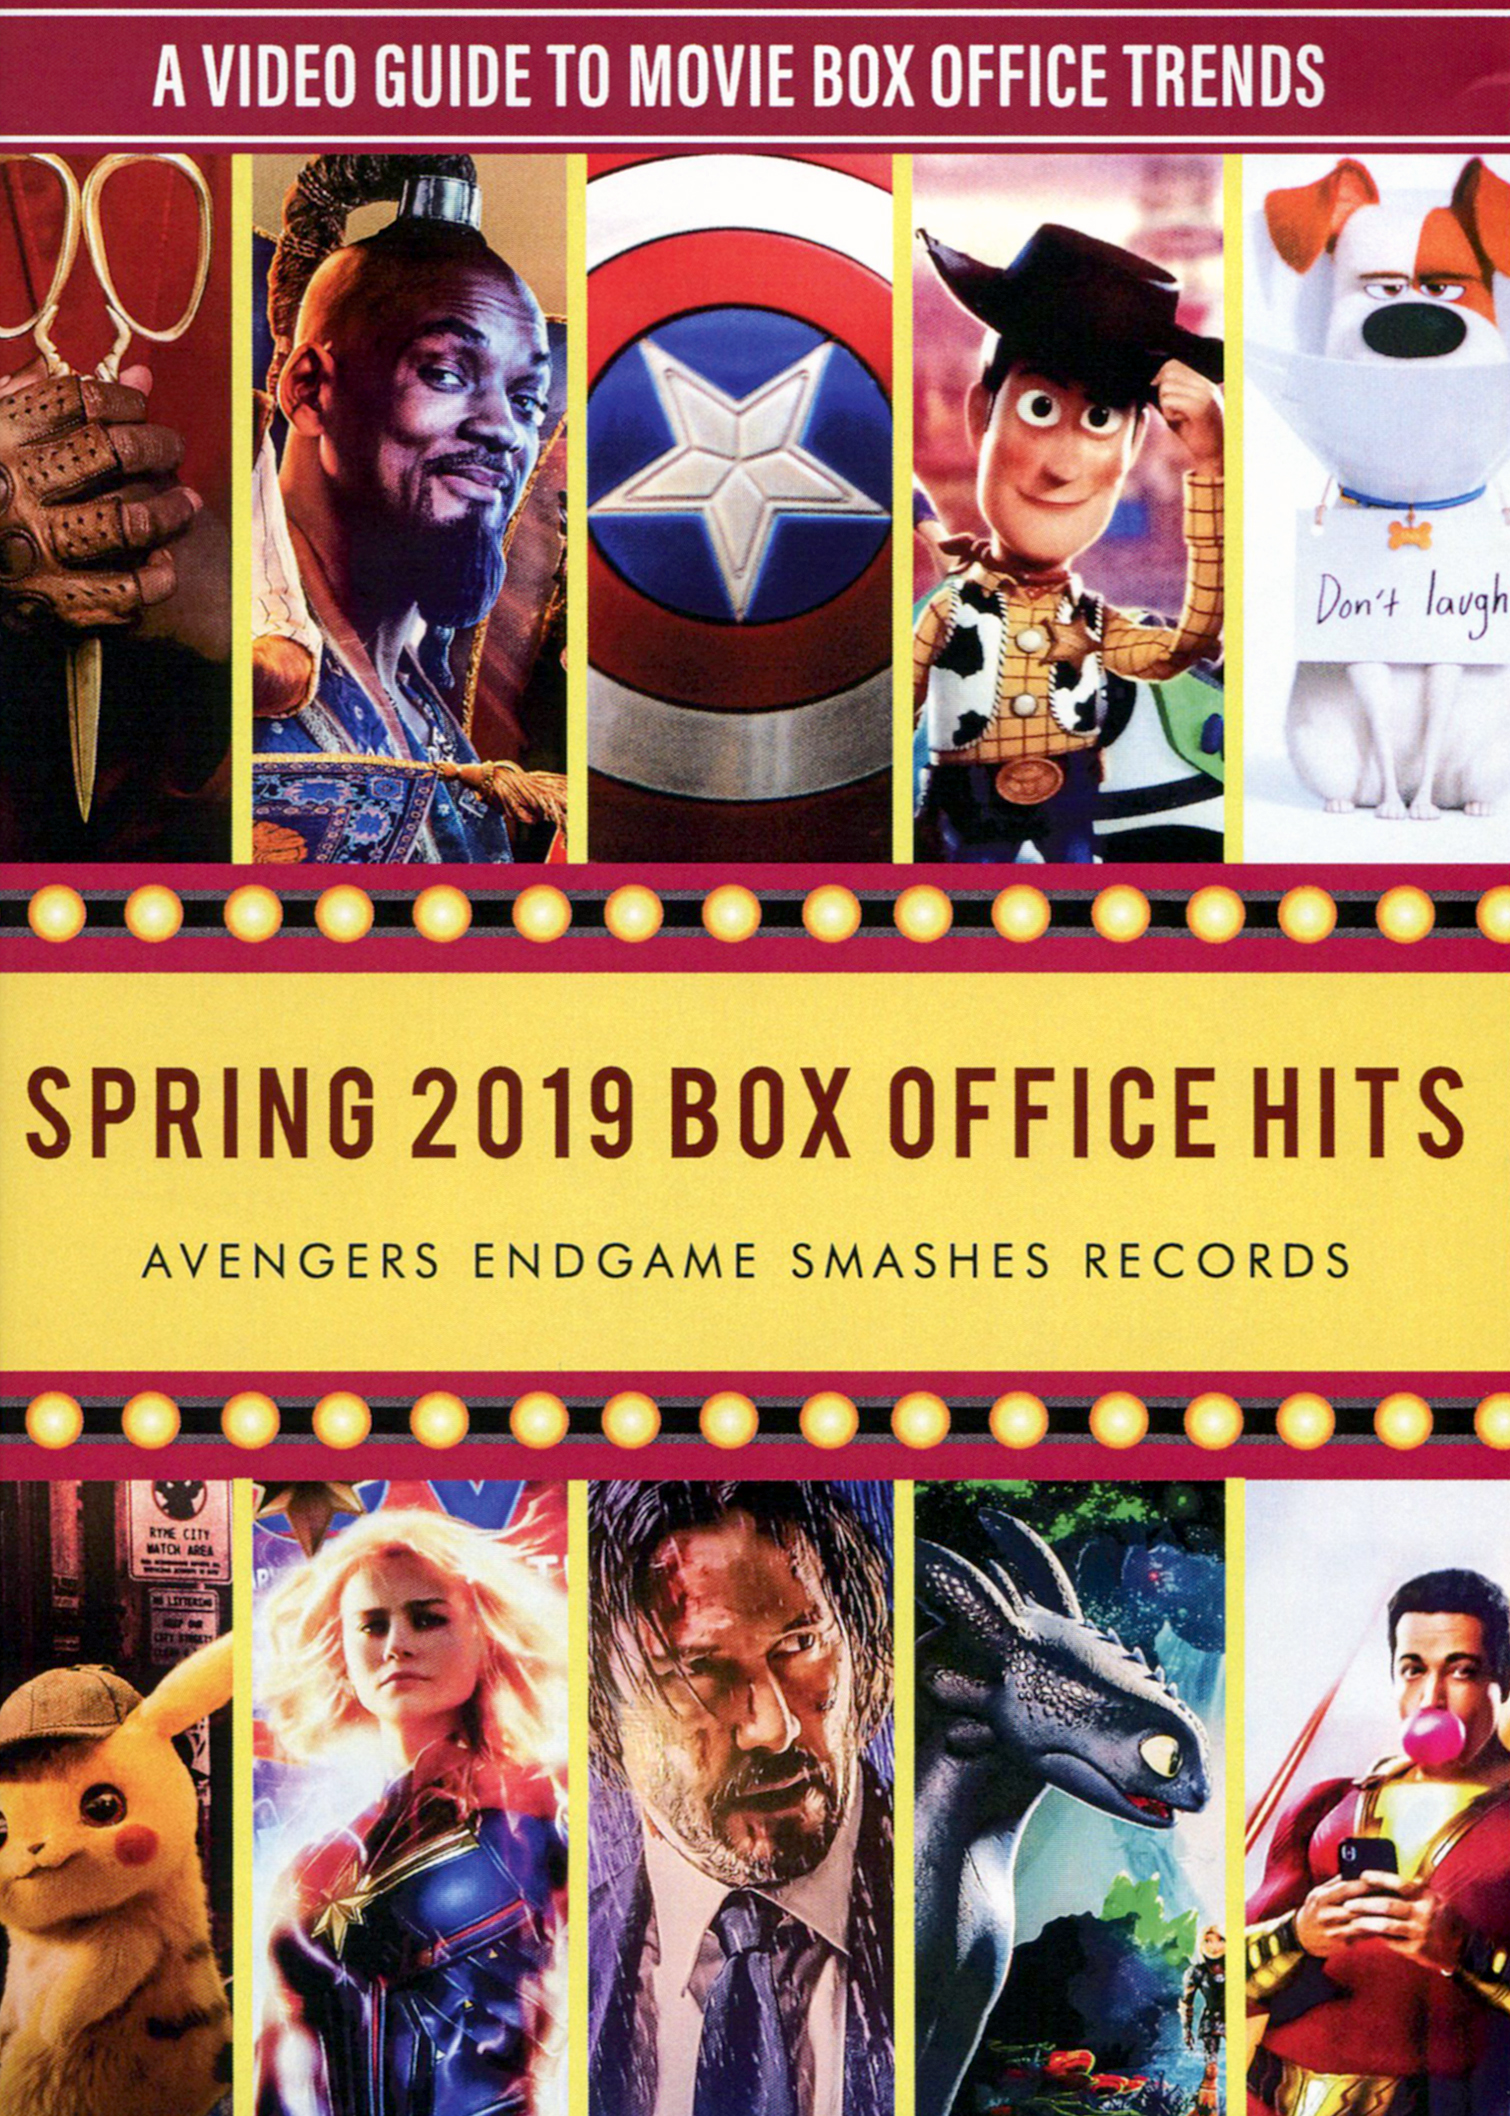 A Video Guide to Movie Box Office Trends: Spring 2019 Box Office Hits -  Best Buy